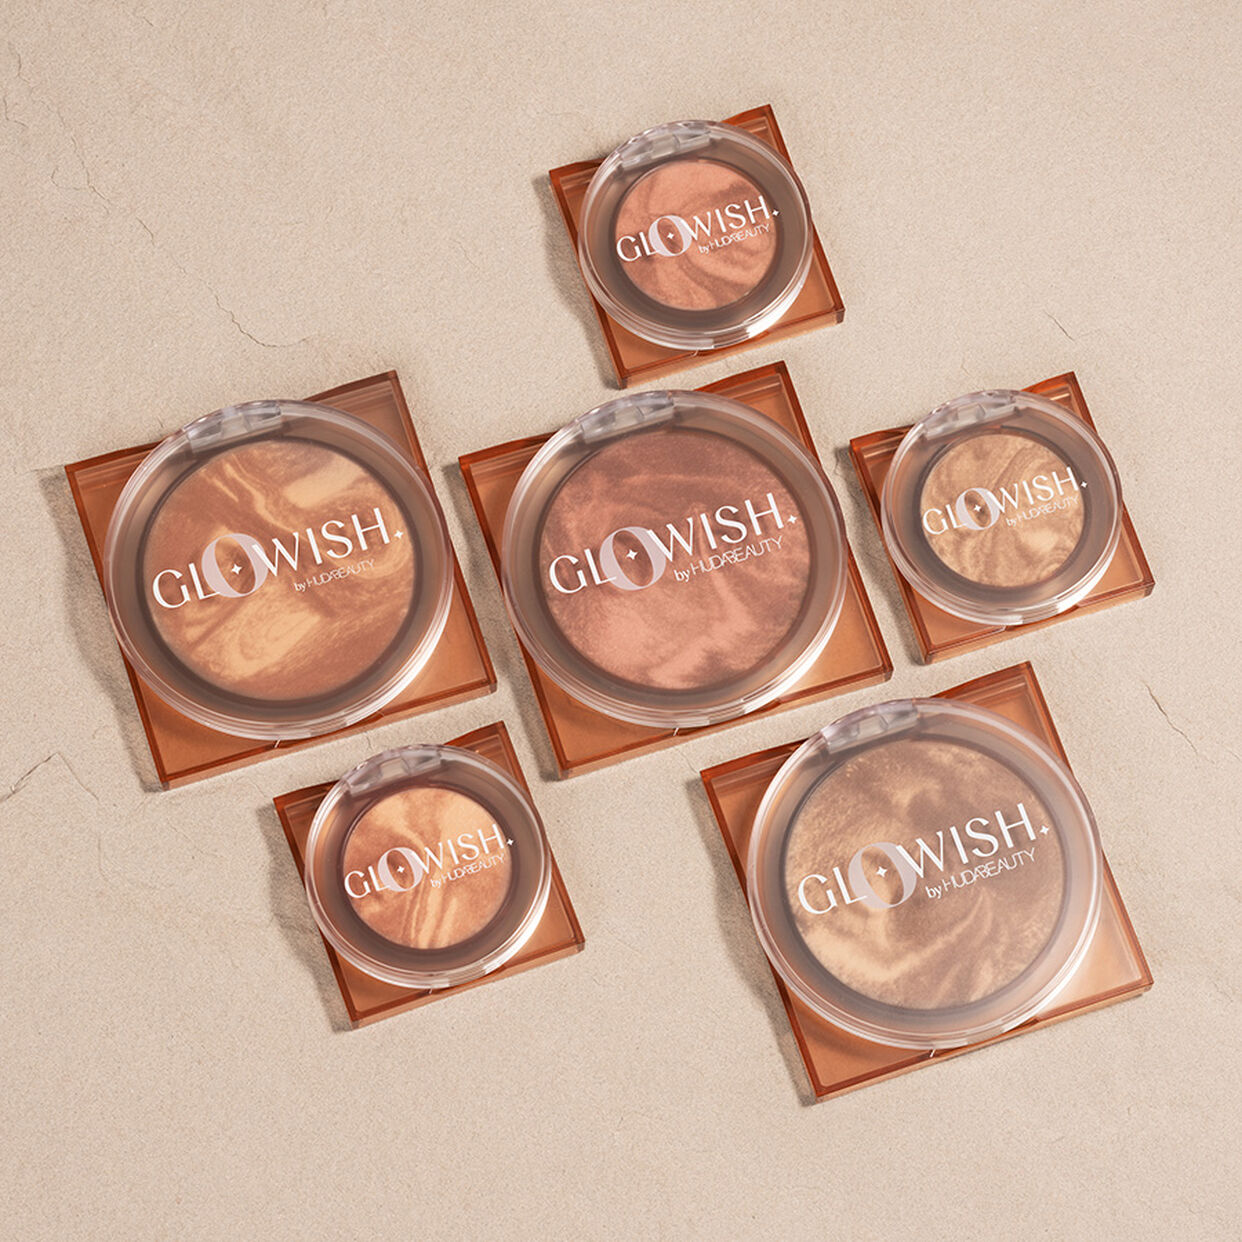 Huda Beauty Glowish Bronzing Powder “02 Medium” Made in Italy, Beauty &  Personal Care, Face, Makeup on Carousell